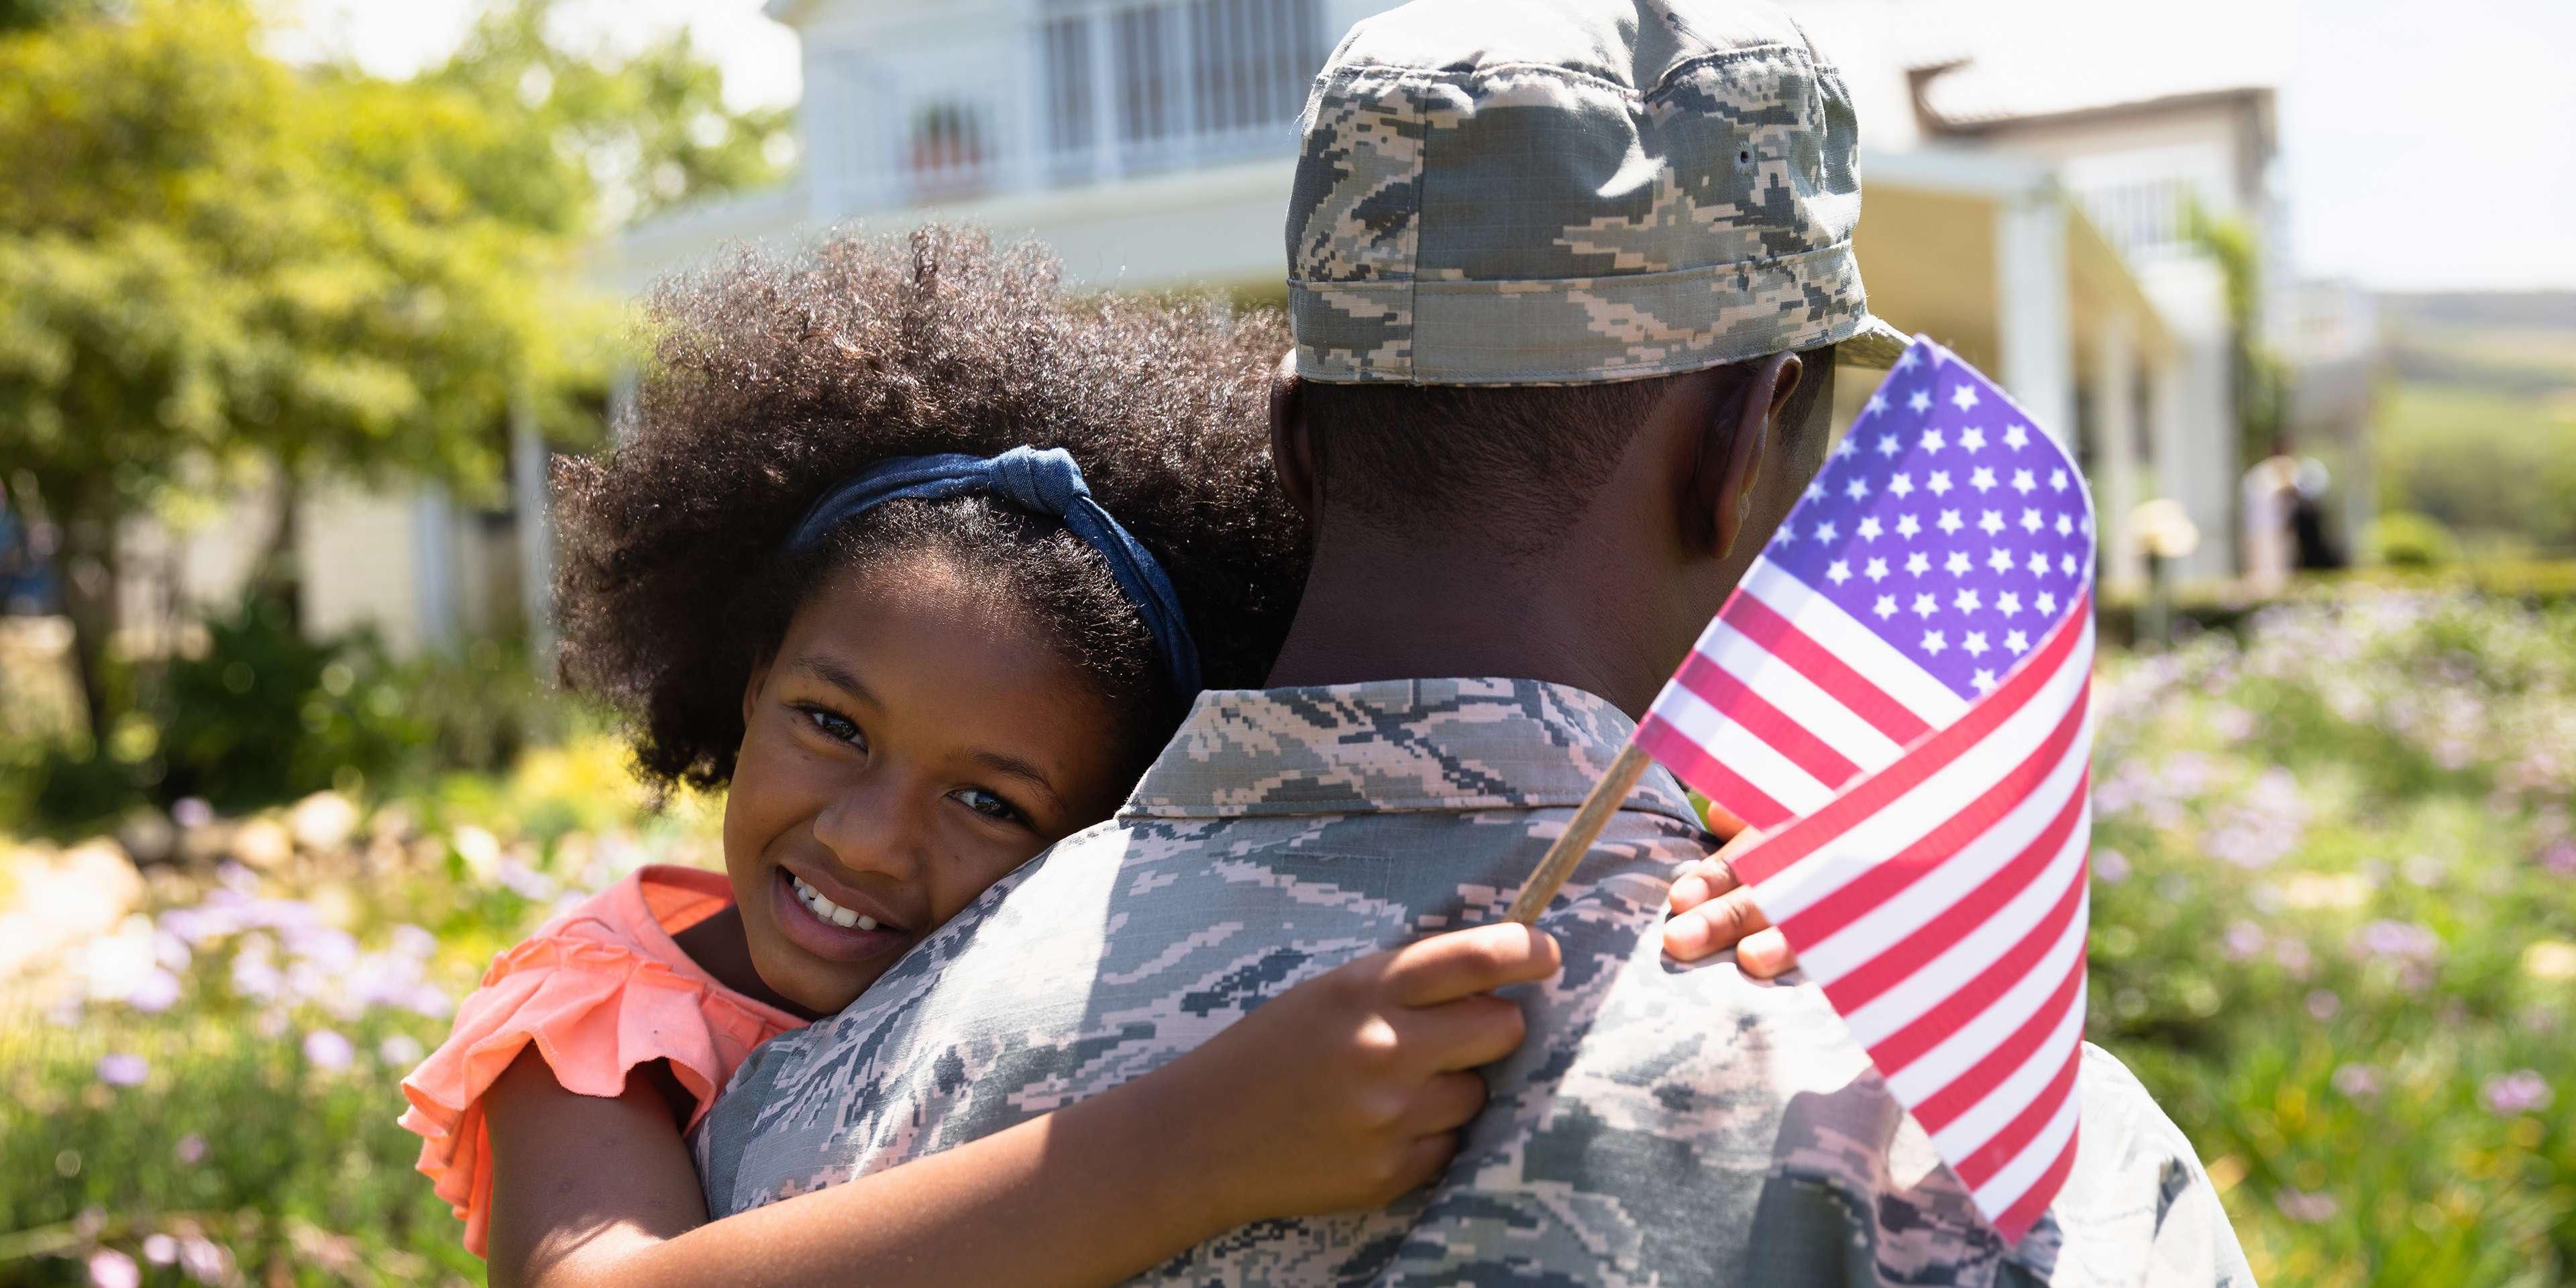 We offer a special leisure rate for US and Canadian active duty, veterans, or retired military and family members as our thanks for your service. Click learn more below and select your dates to find the military appreciation rate!